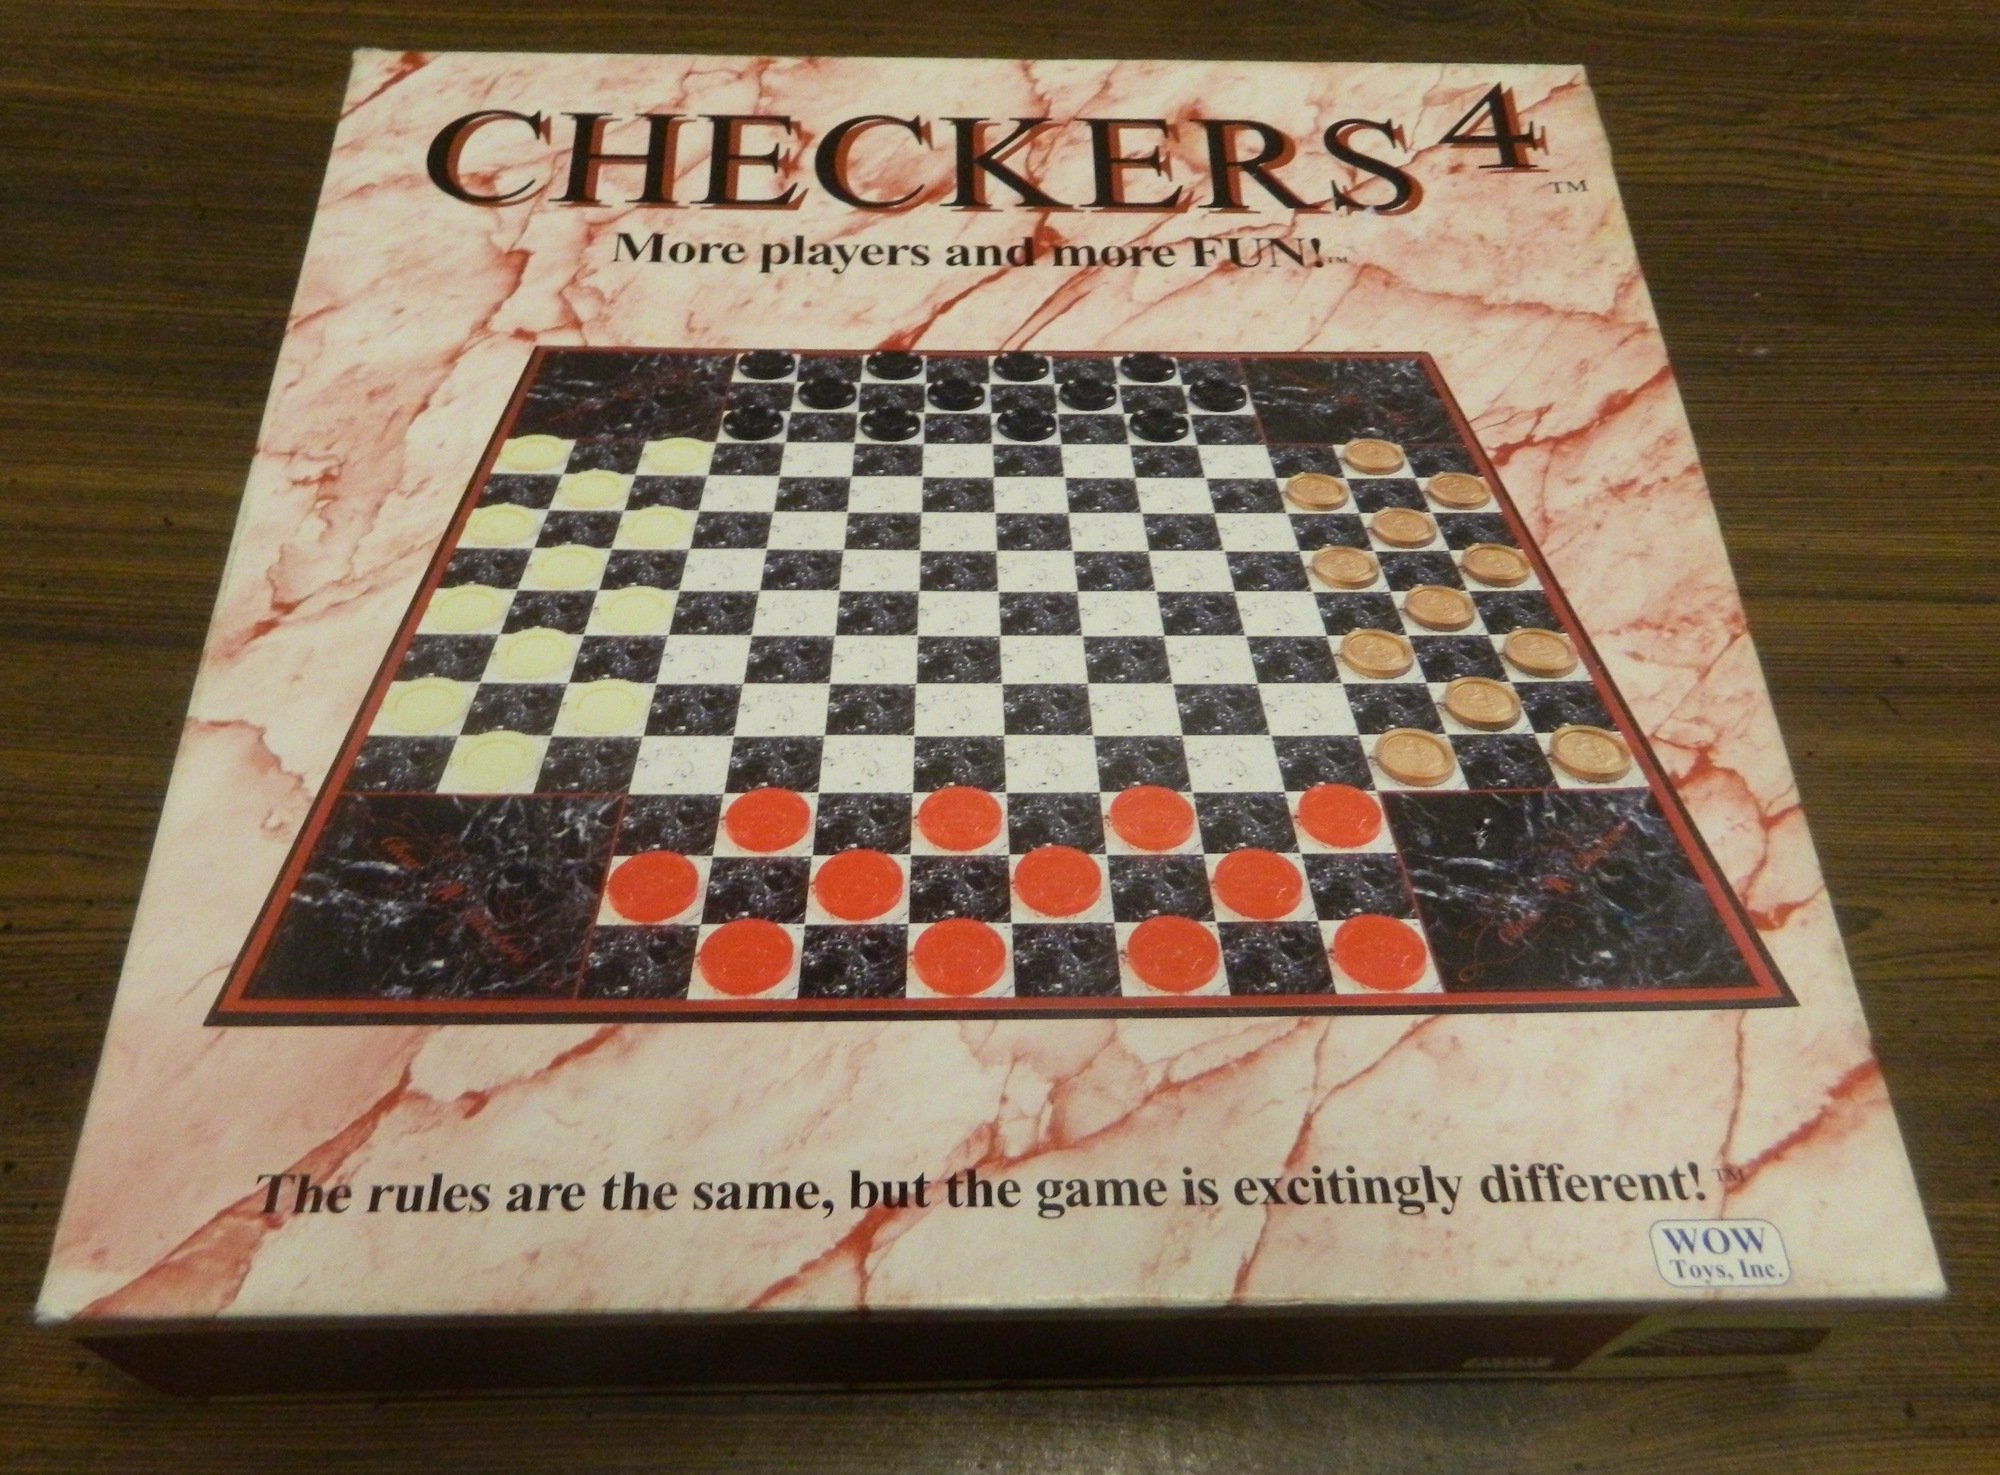 Checkers4 Board Game Review and Rules